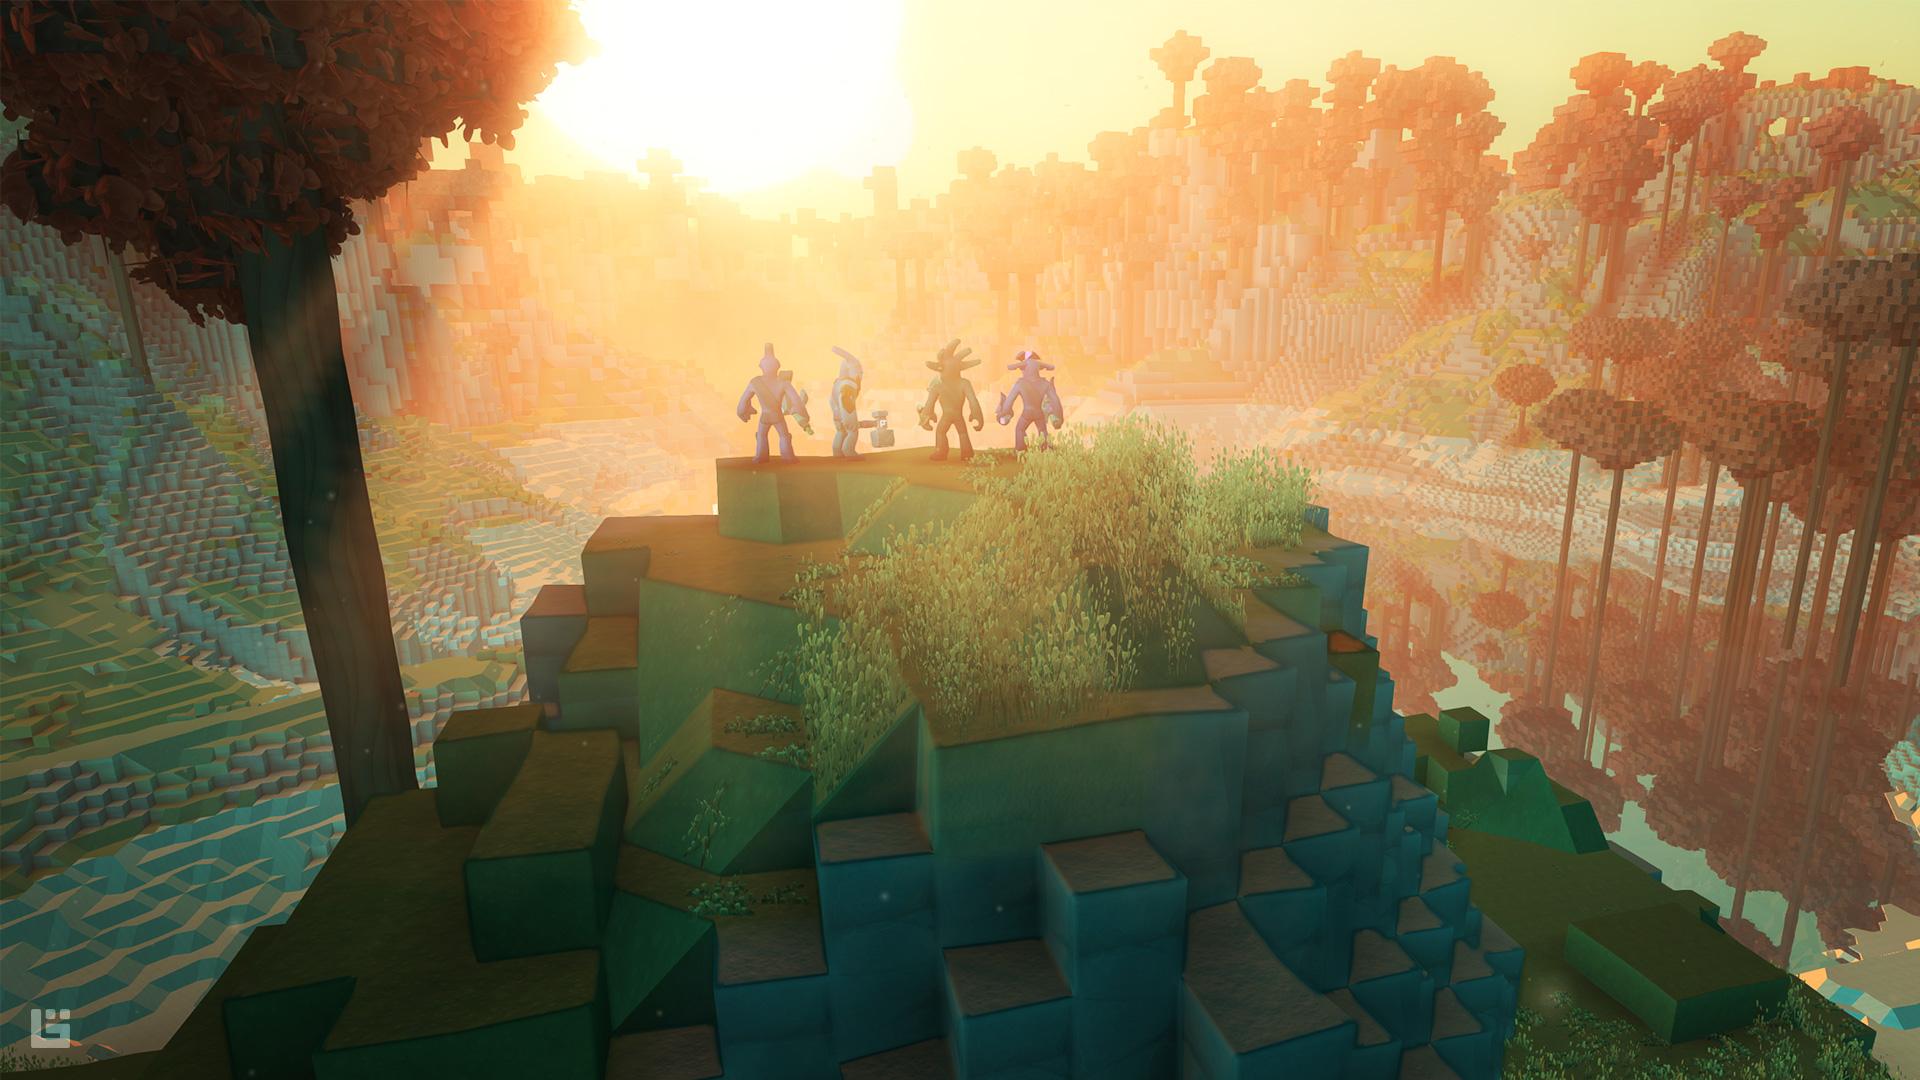 Screenshot №17 from game Boundless